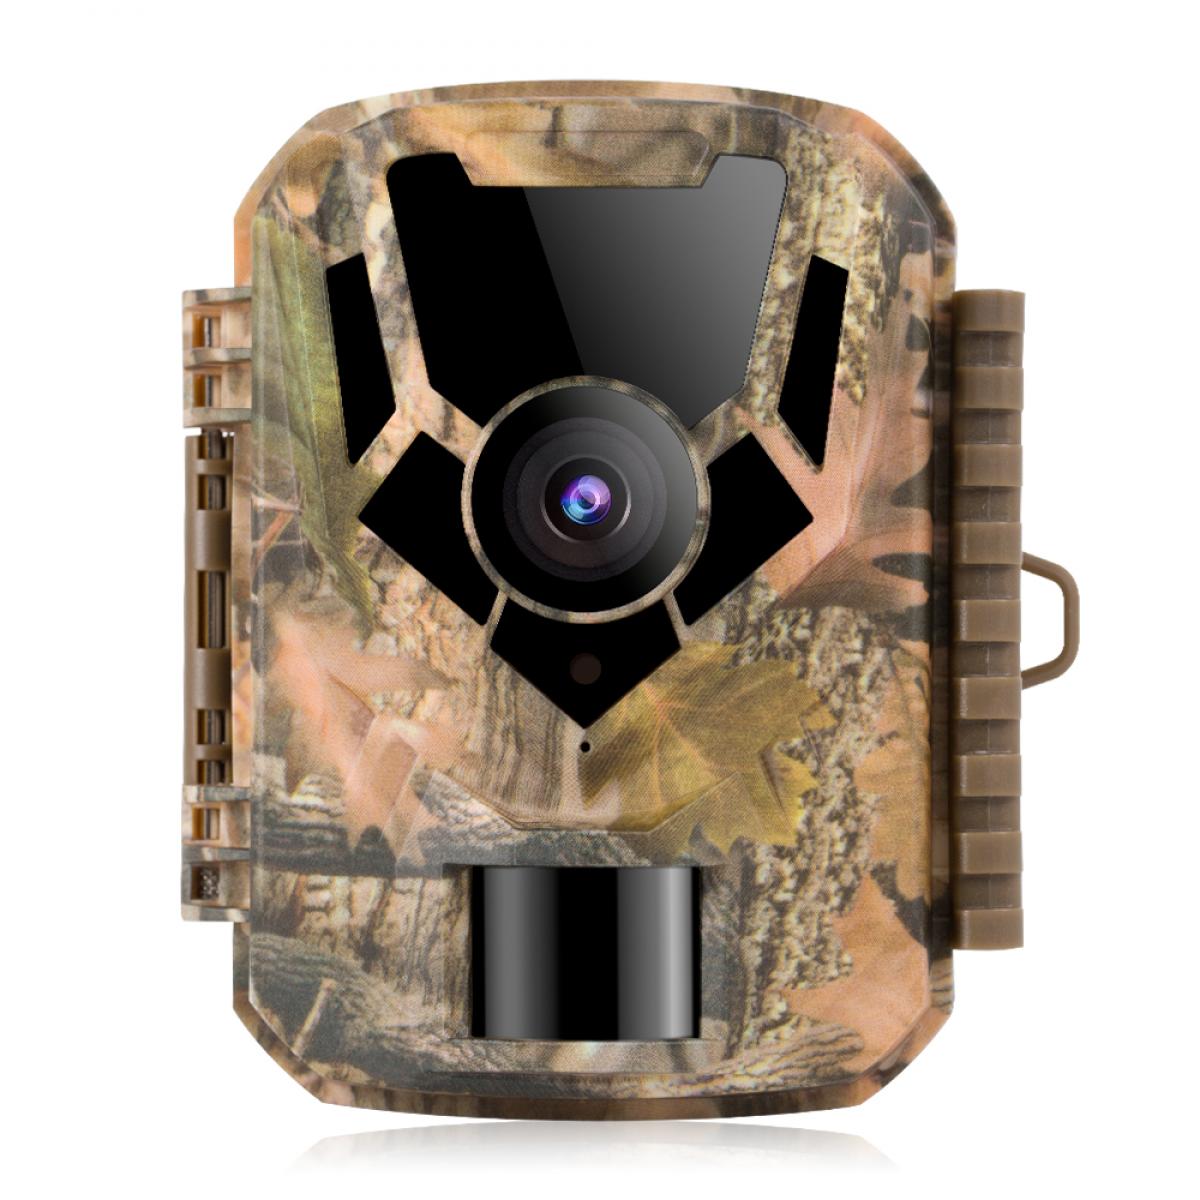 16MP Trail Camera 0.4s Trigger Time HD Outdoor Waterproof - K&F 